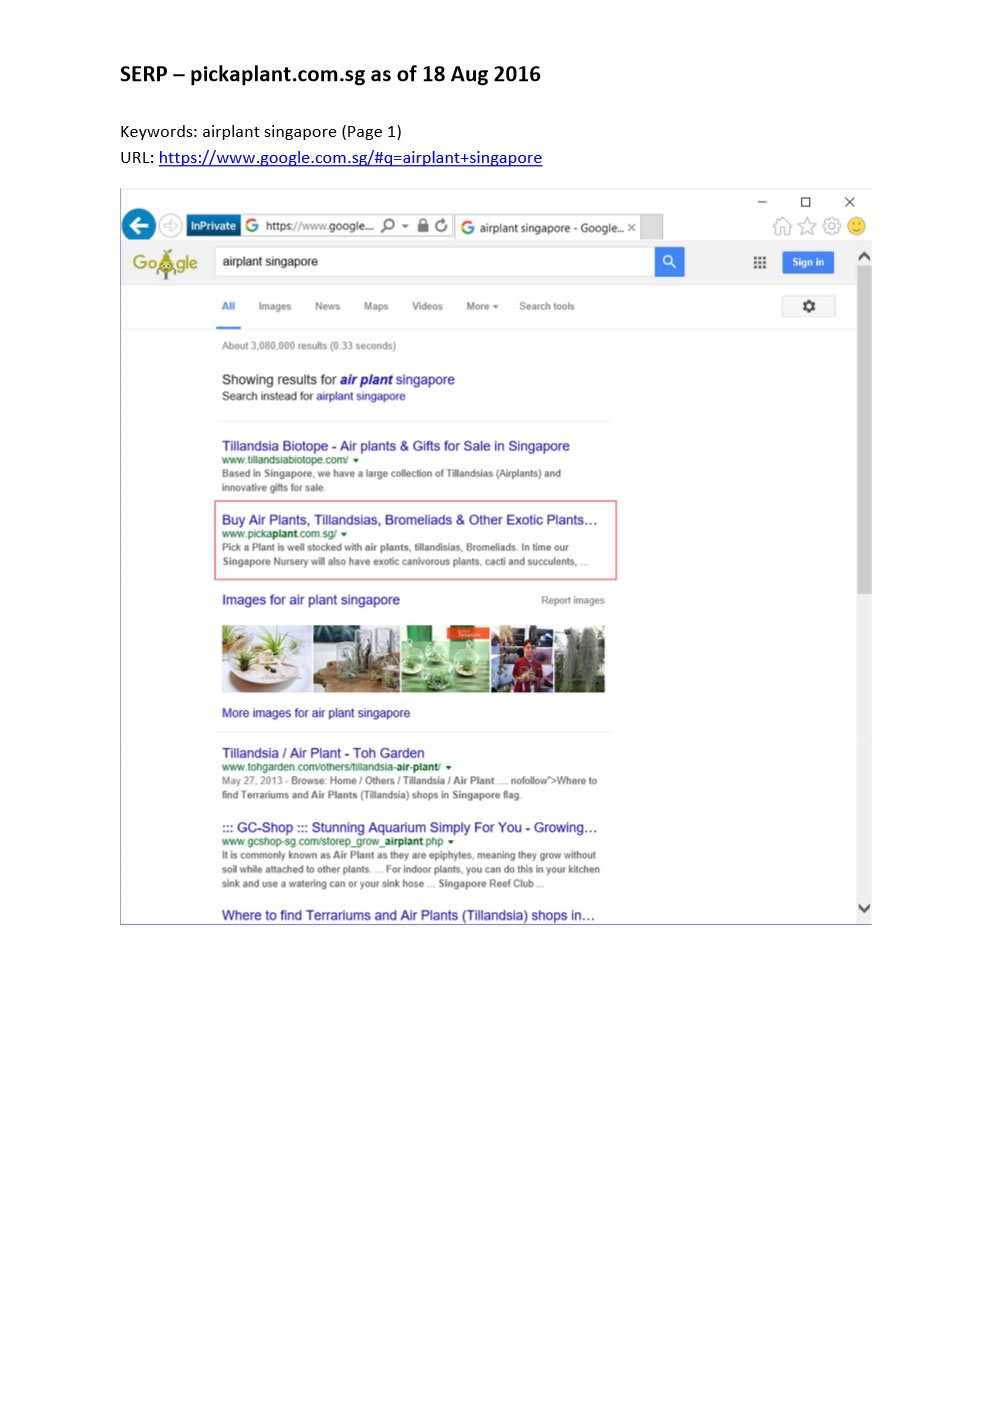 Google Ranking on Page 1